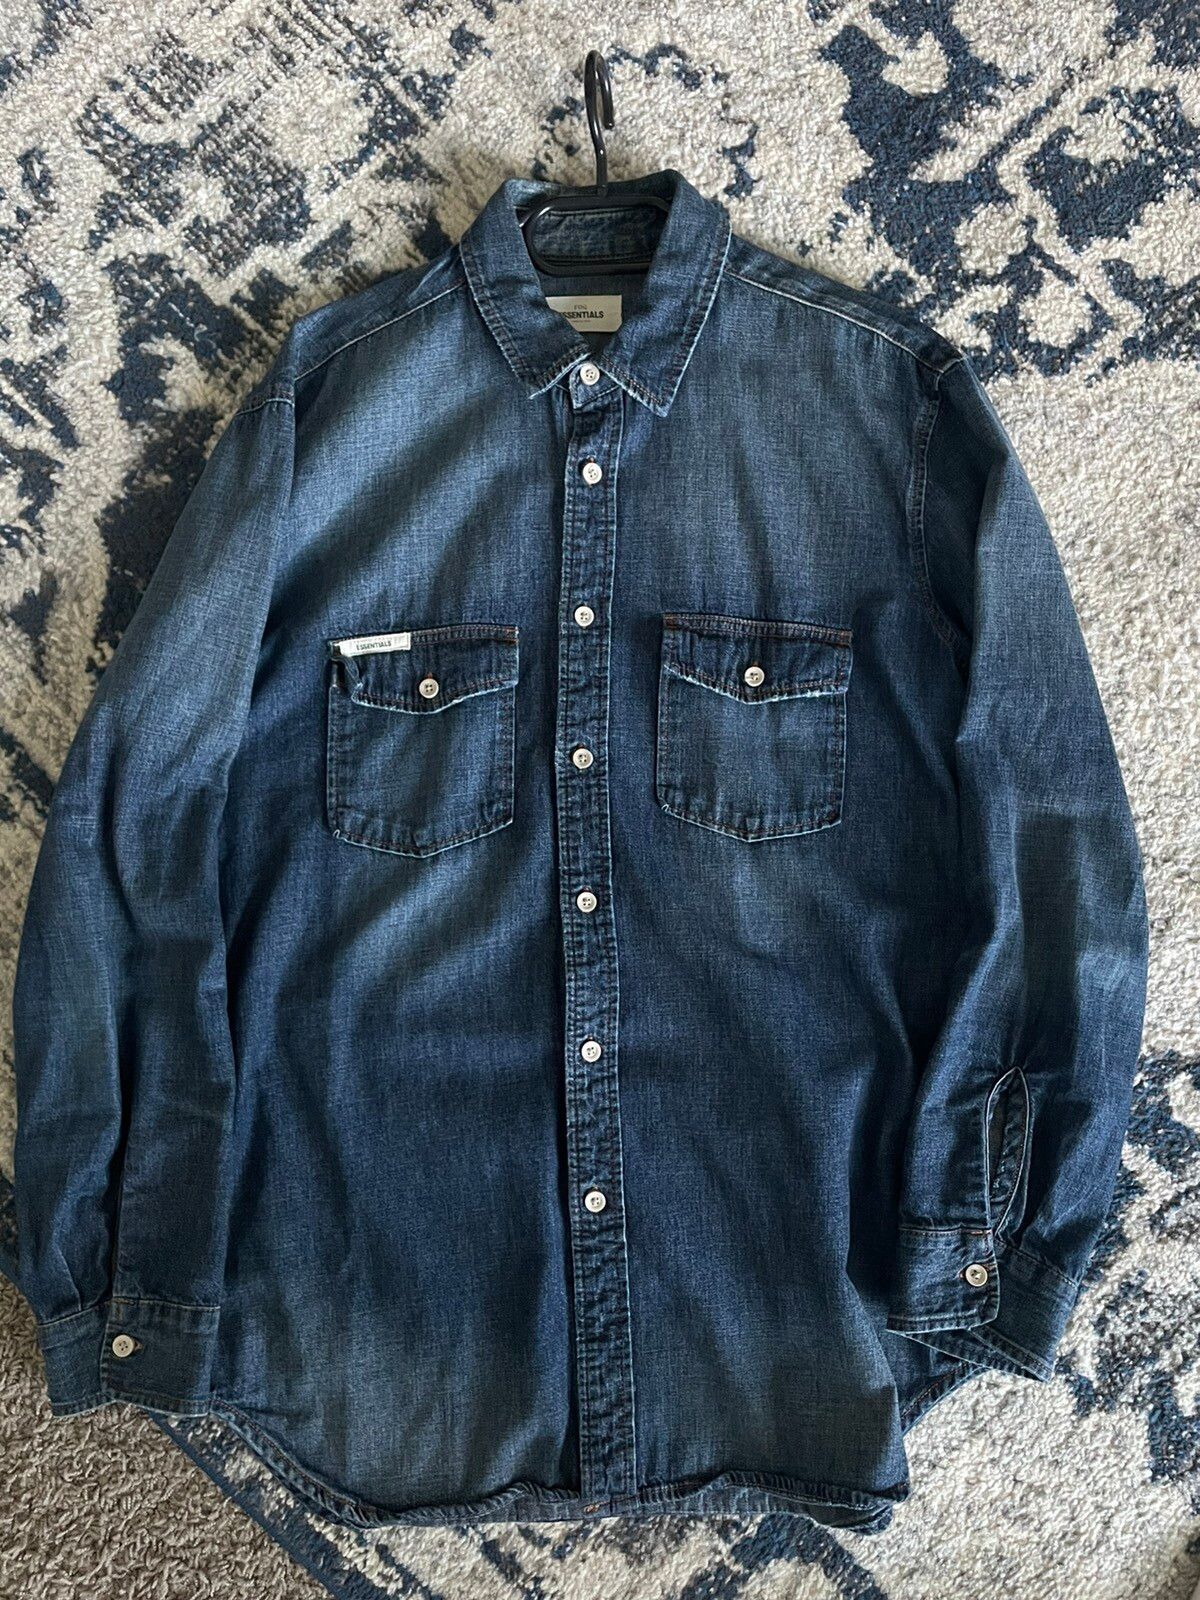 Fear of God Fear of God Essentials Denim Button Up Size L | Grailed